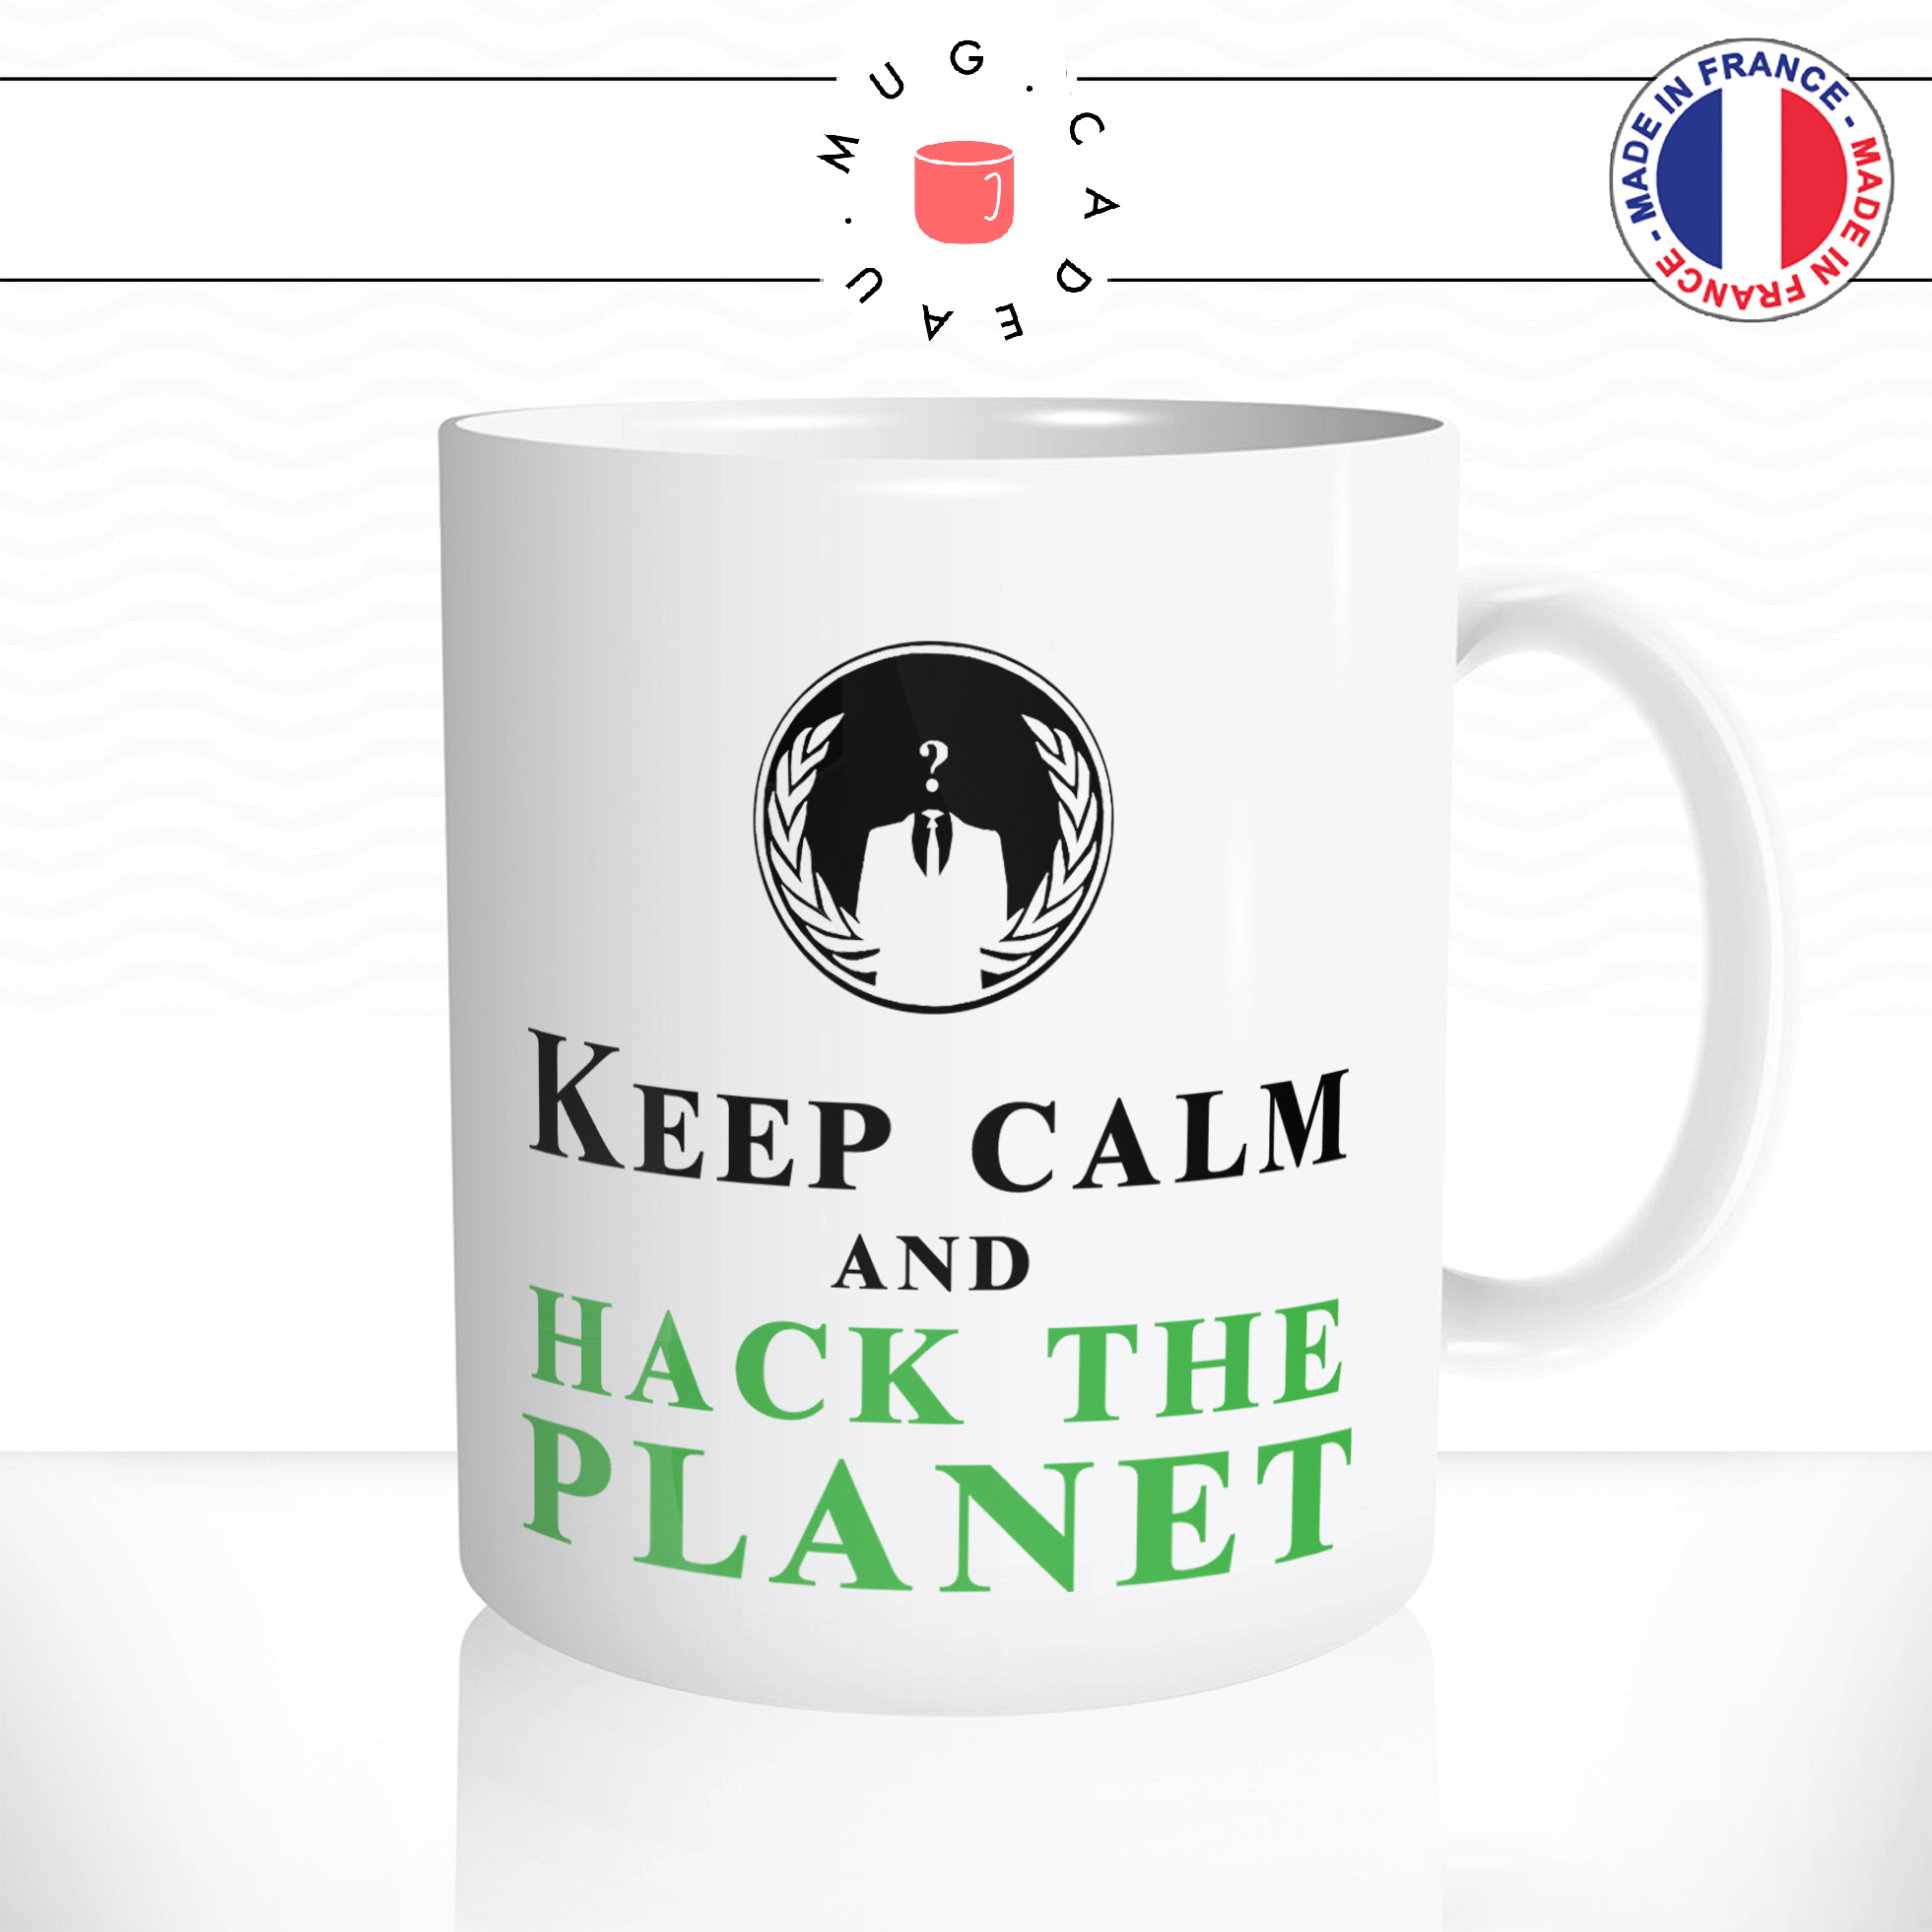 mug-tasse-ref5-keep-calm-and-hack-the-planet-cafe-the-mugs-tasses-personnalise-anse-droite